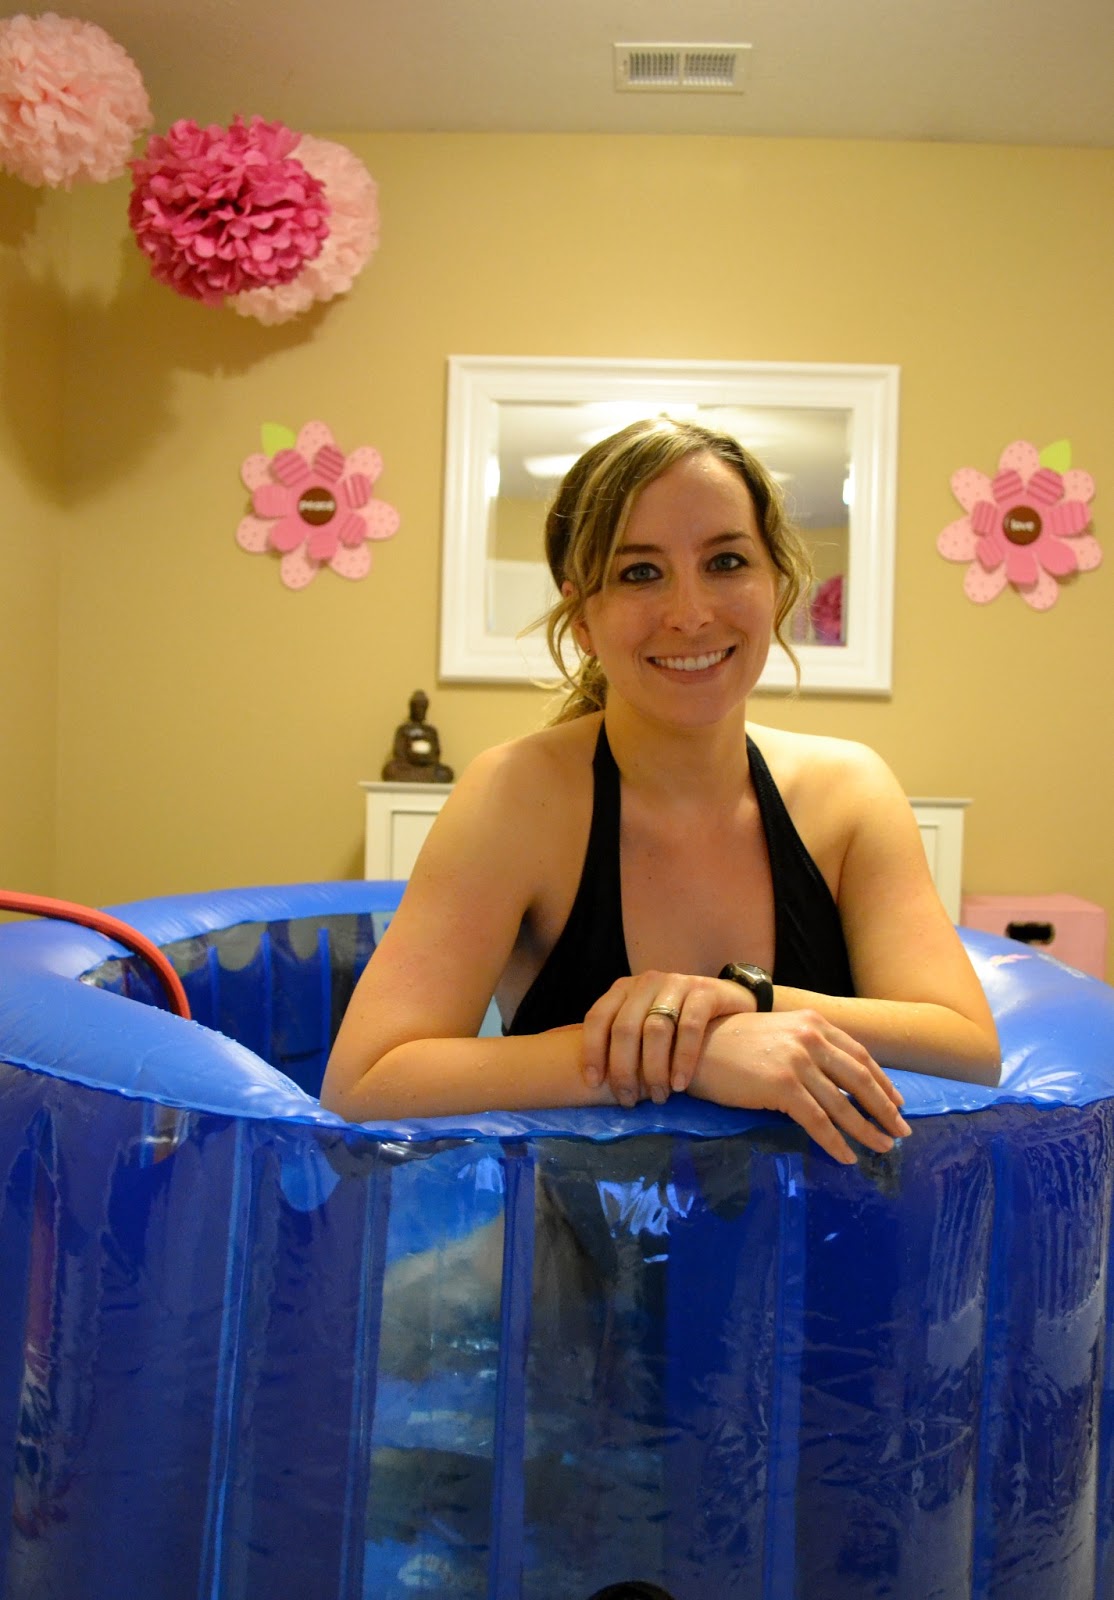 Ashley's Green Life: 37 Weeks and Preparing for My Home/Waterbirth